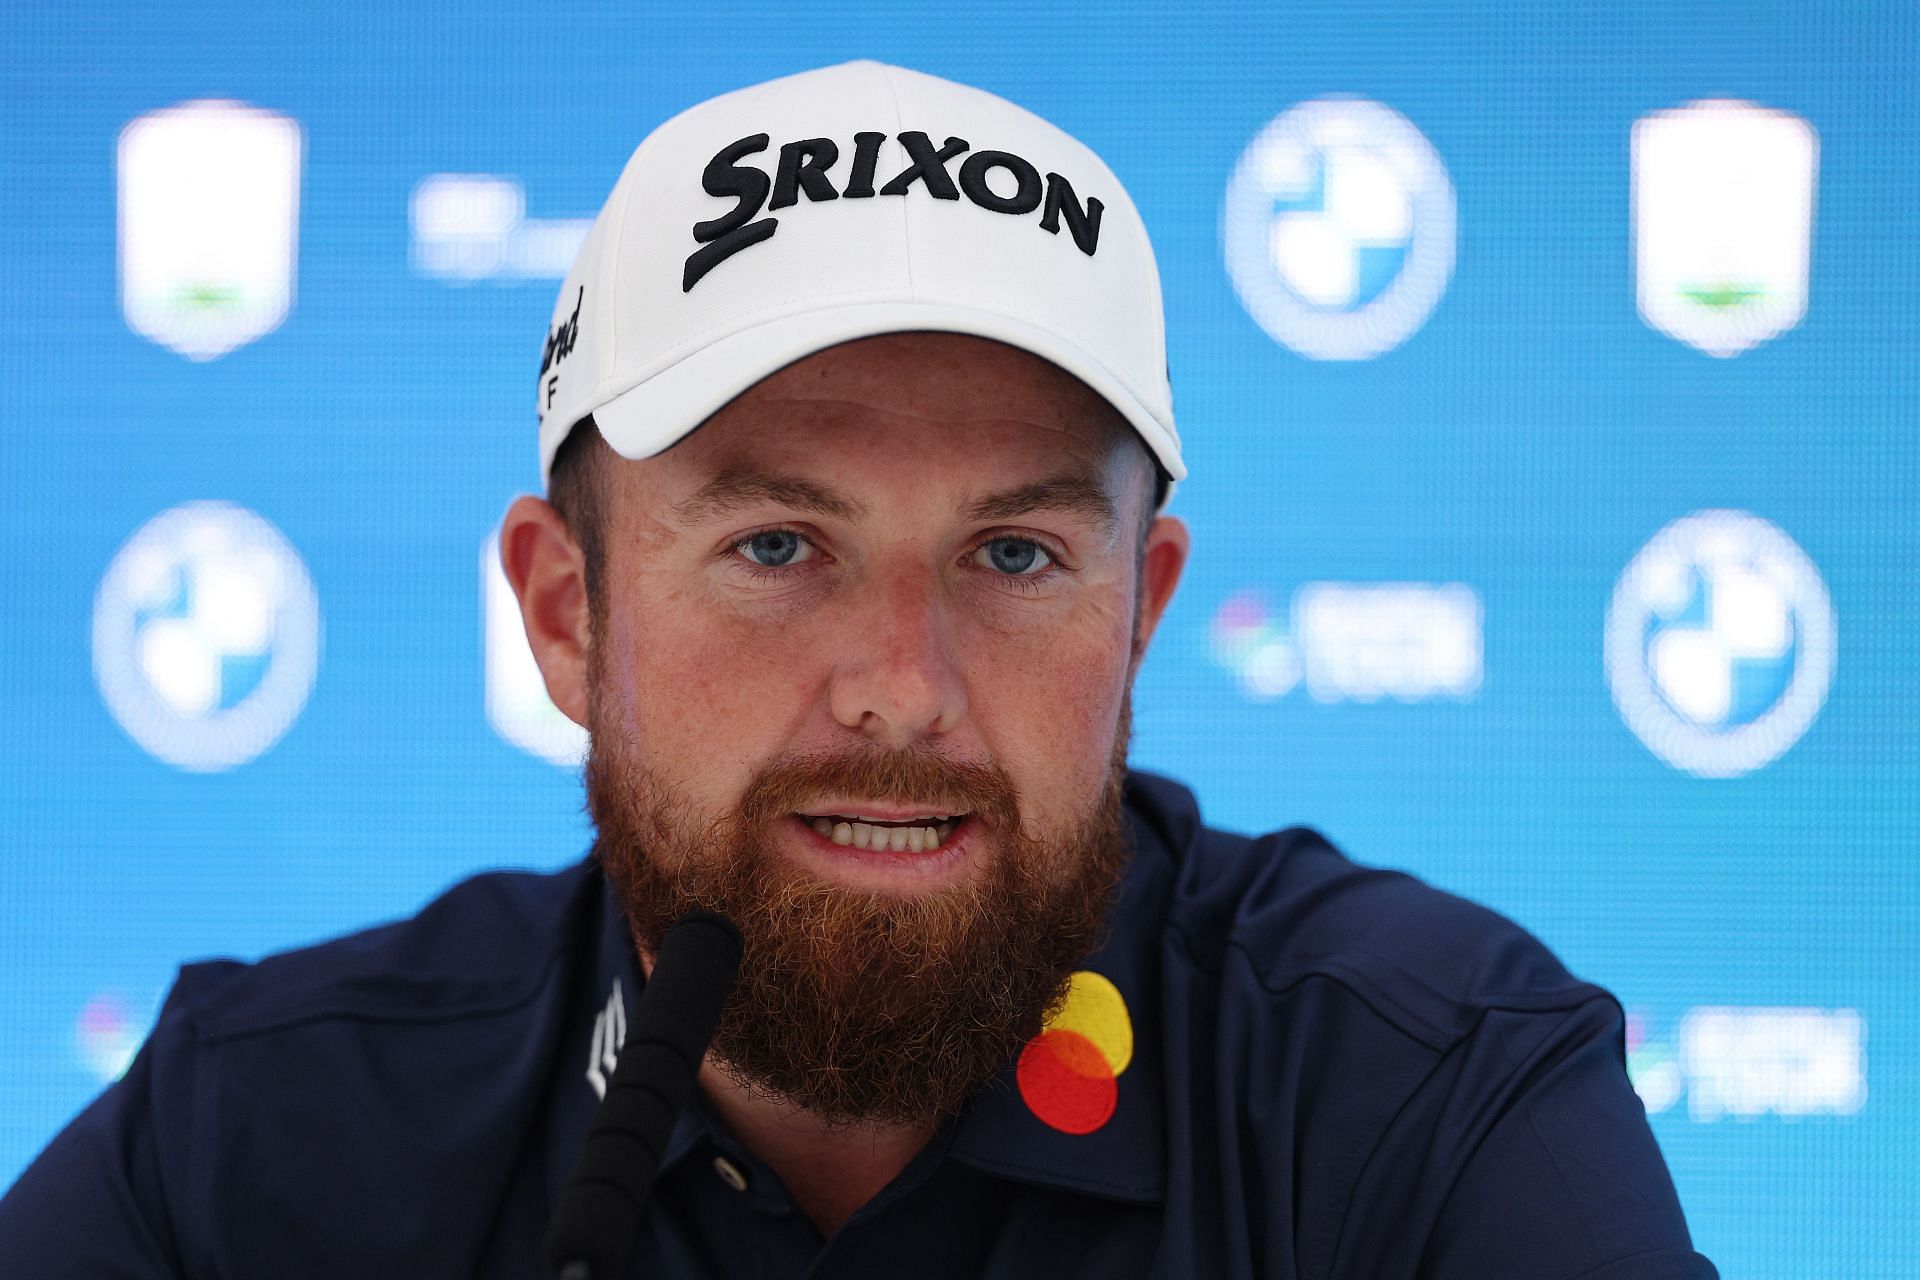 Shane Lowry is the defending champion at the BMW PGA Championship